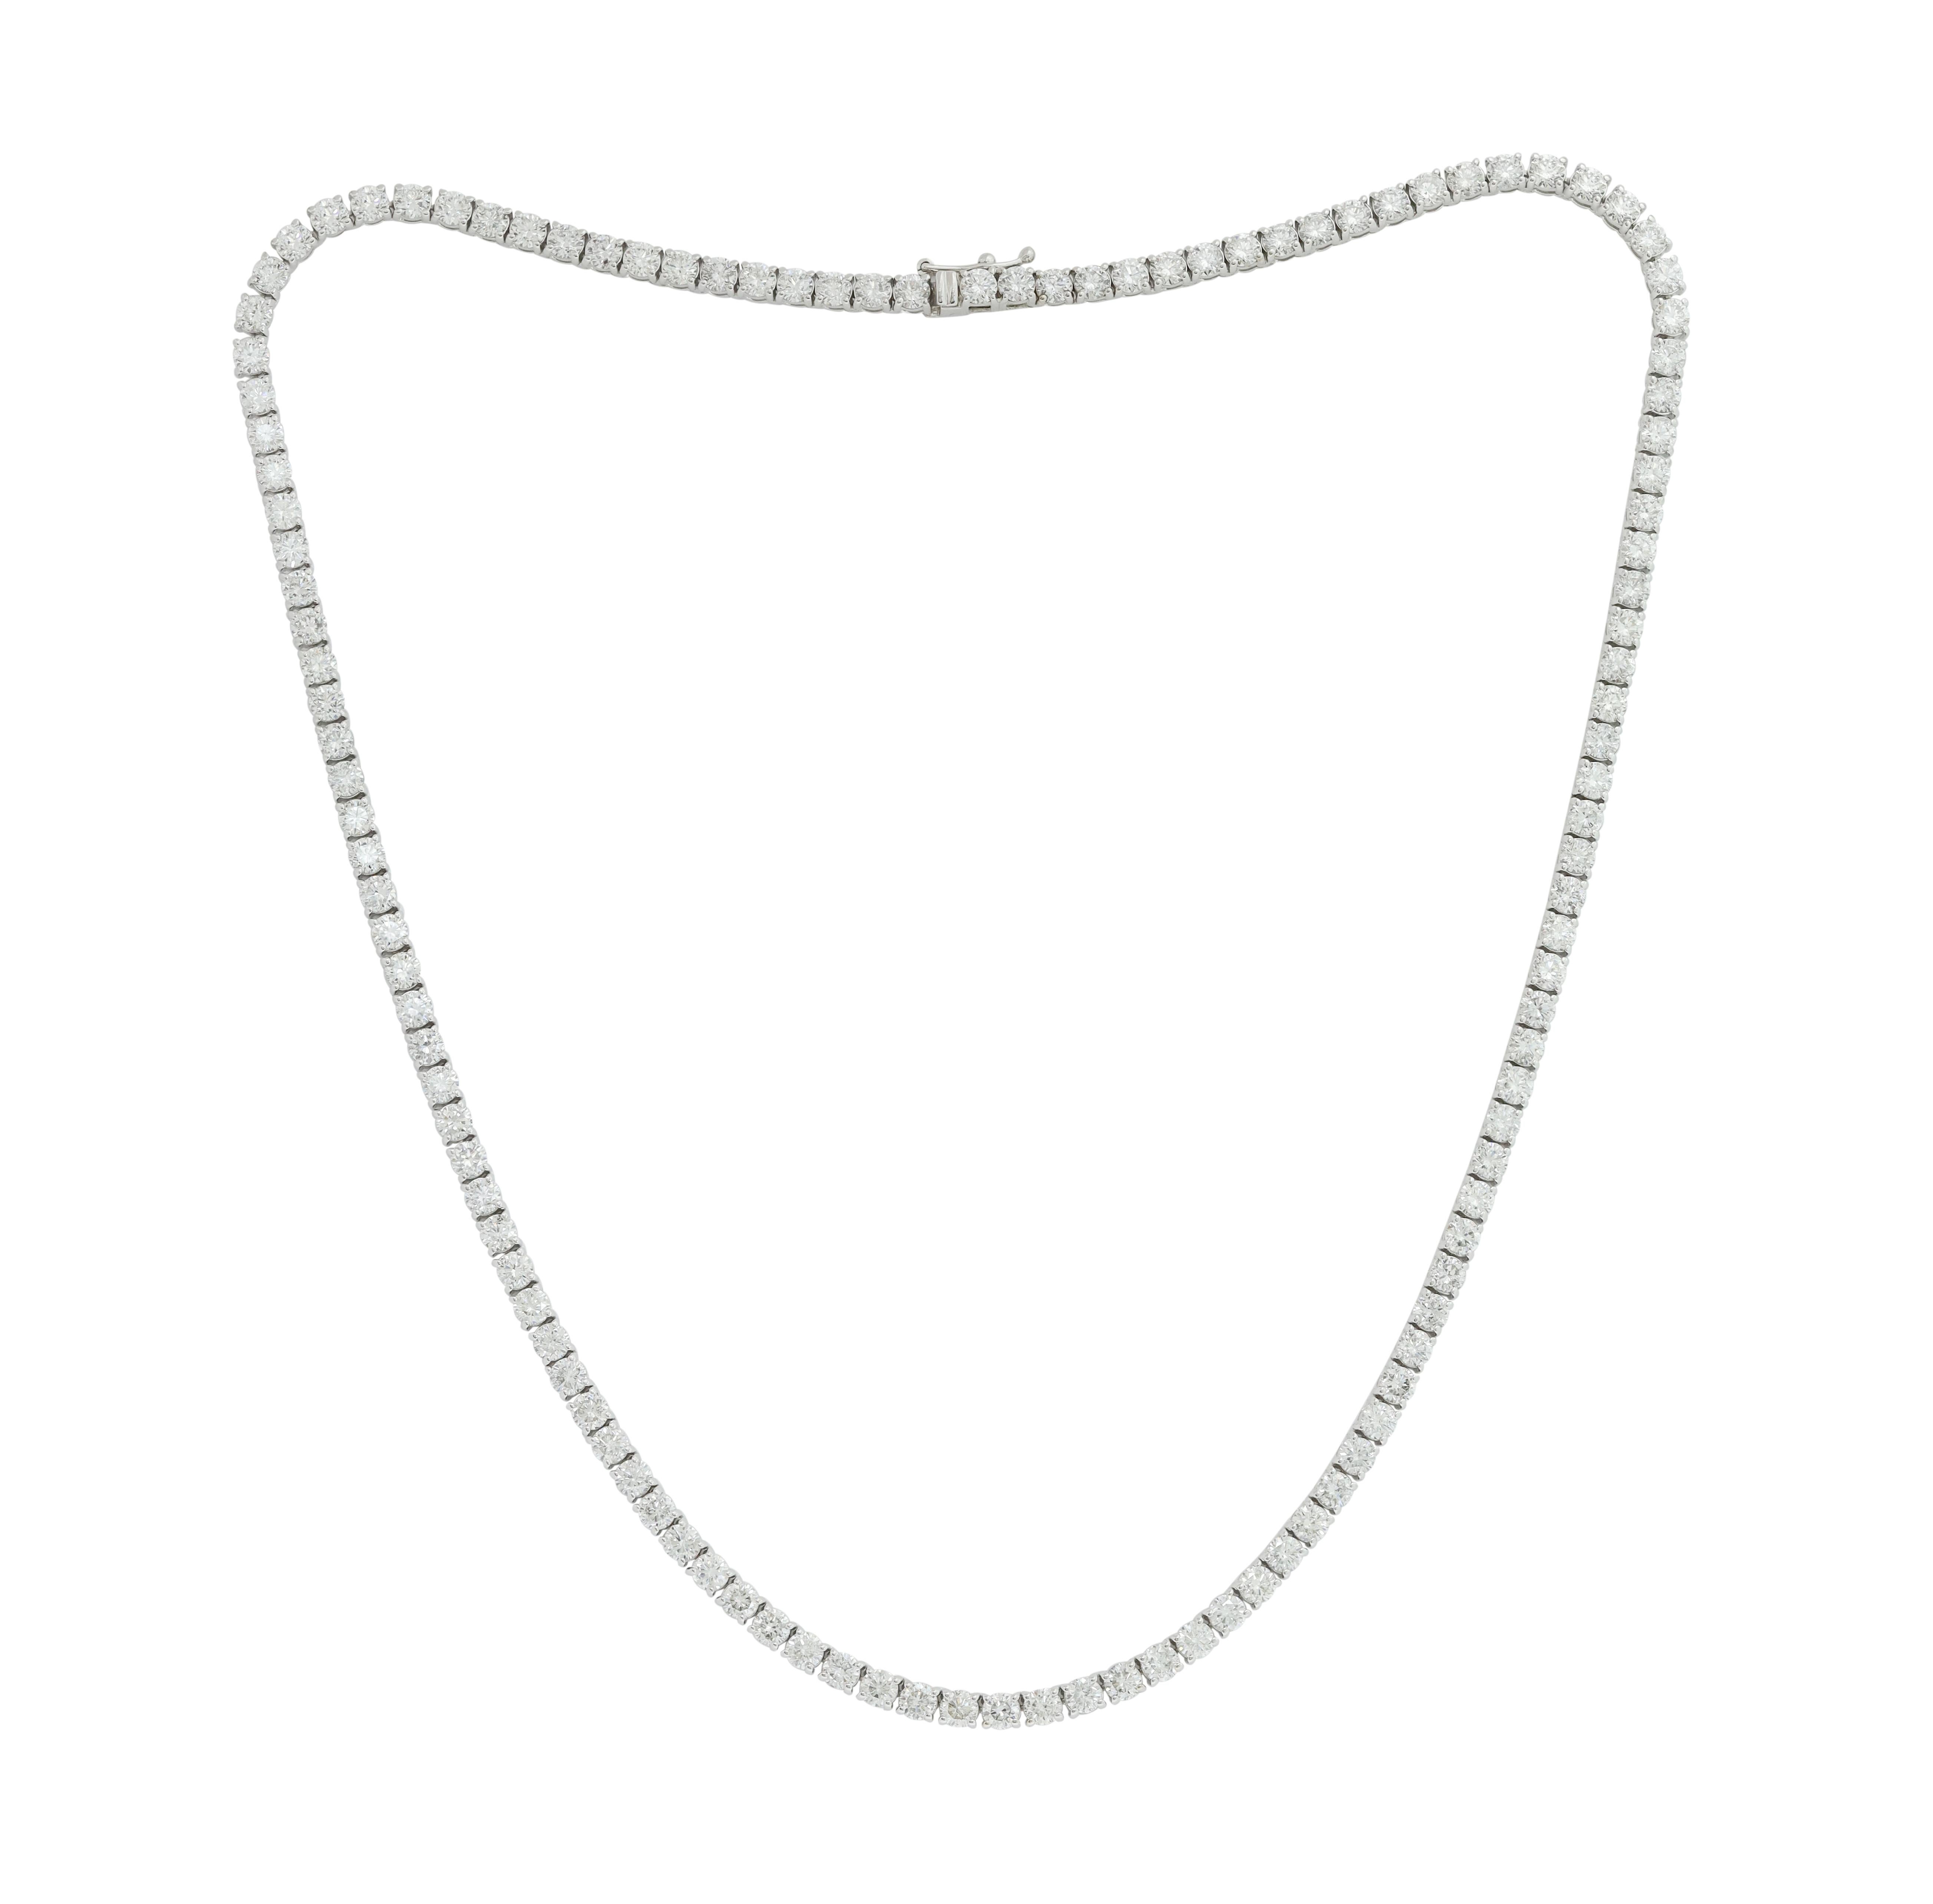 14K White Gold Diamond Straight Line Tennis Necklace Features 12.50Cts of Diamonds. Diana M. is a leading supplier of top-quality fine jewelry for over 35 years.
Diana M is one-stop shop for all your jewelry shopping, carrying line of diamond rings,